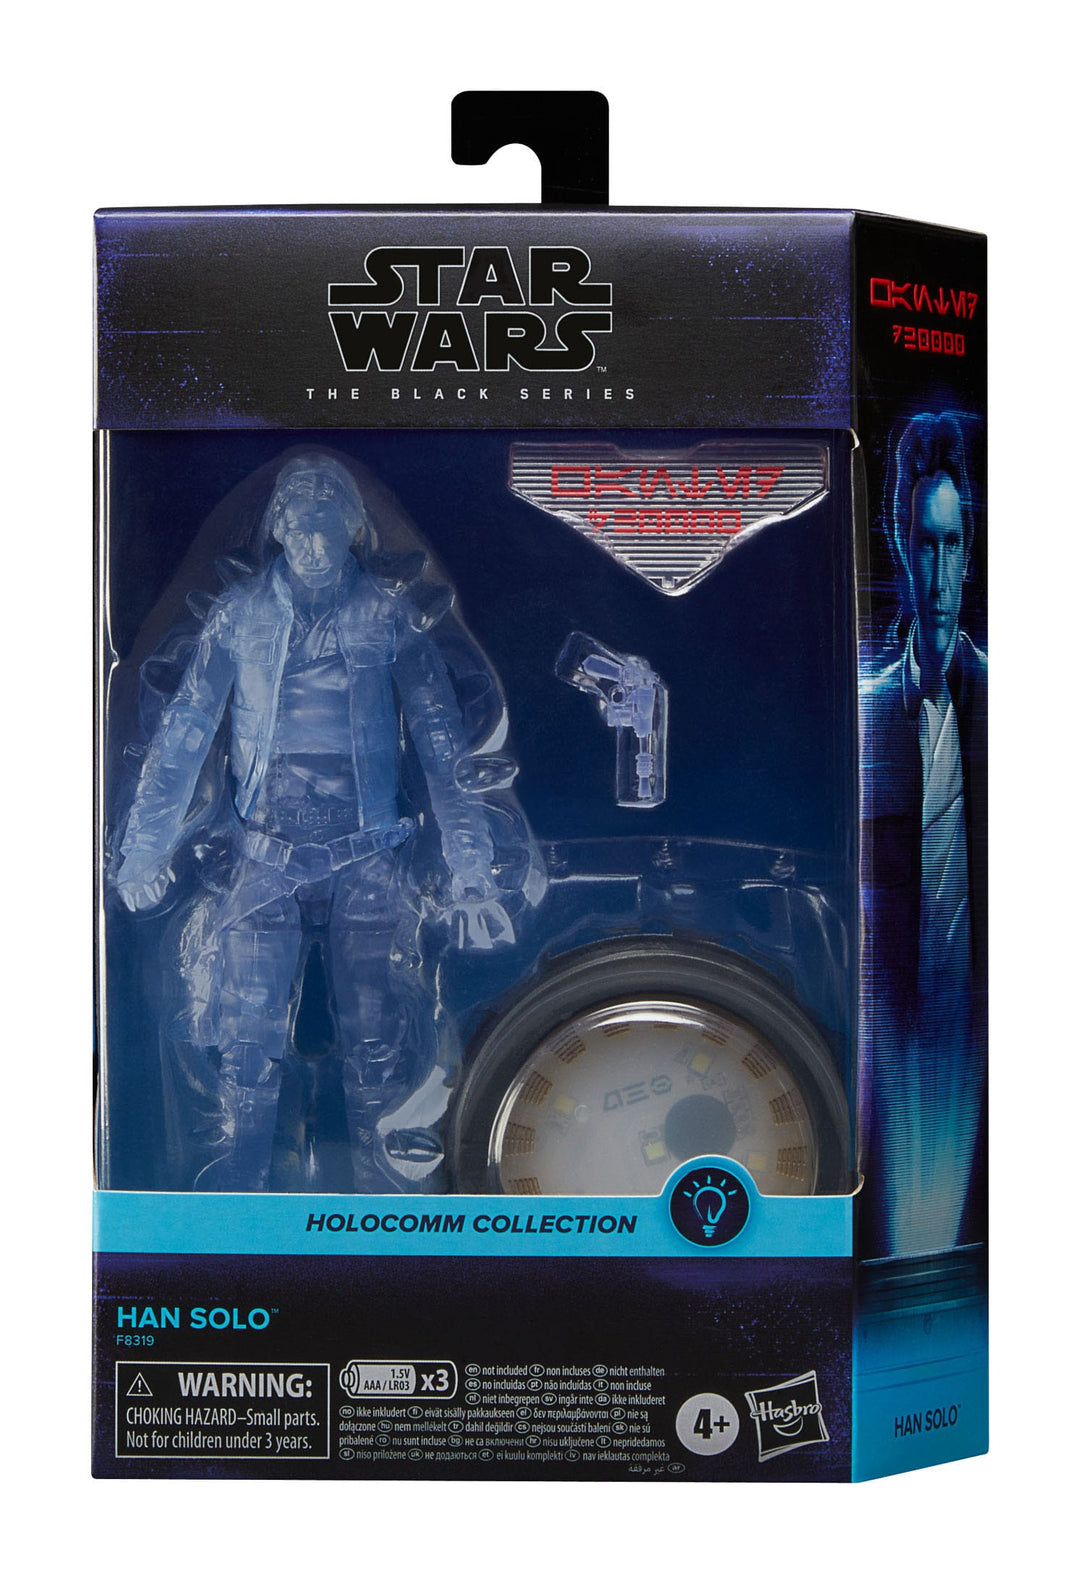 Star Wars The Black Series Holocomm Collection Han Solo 6" Action Figure